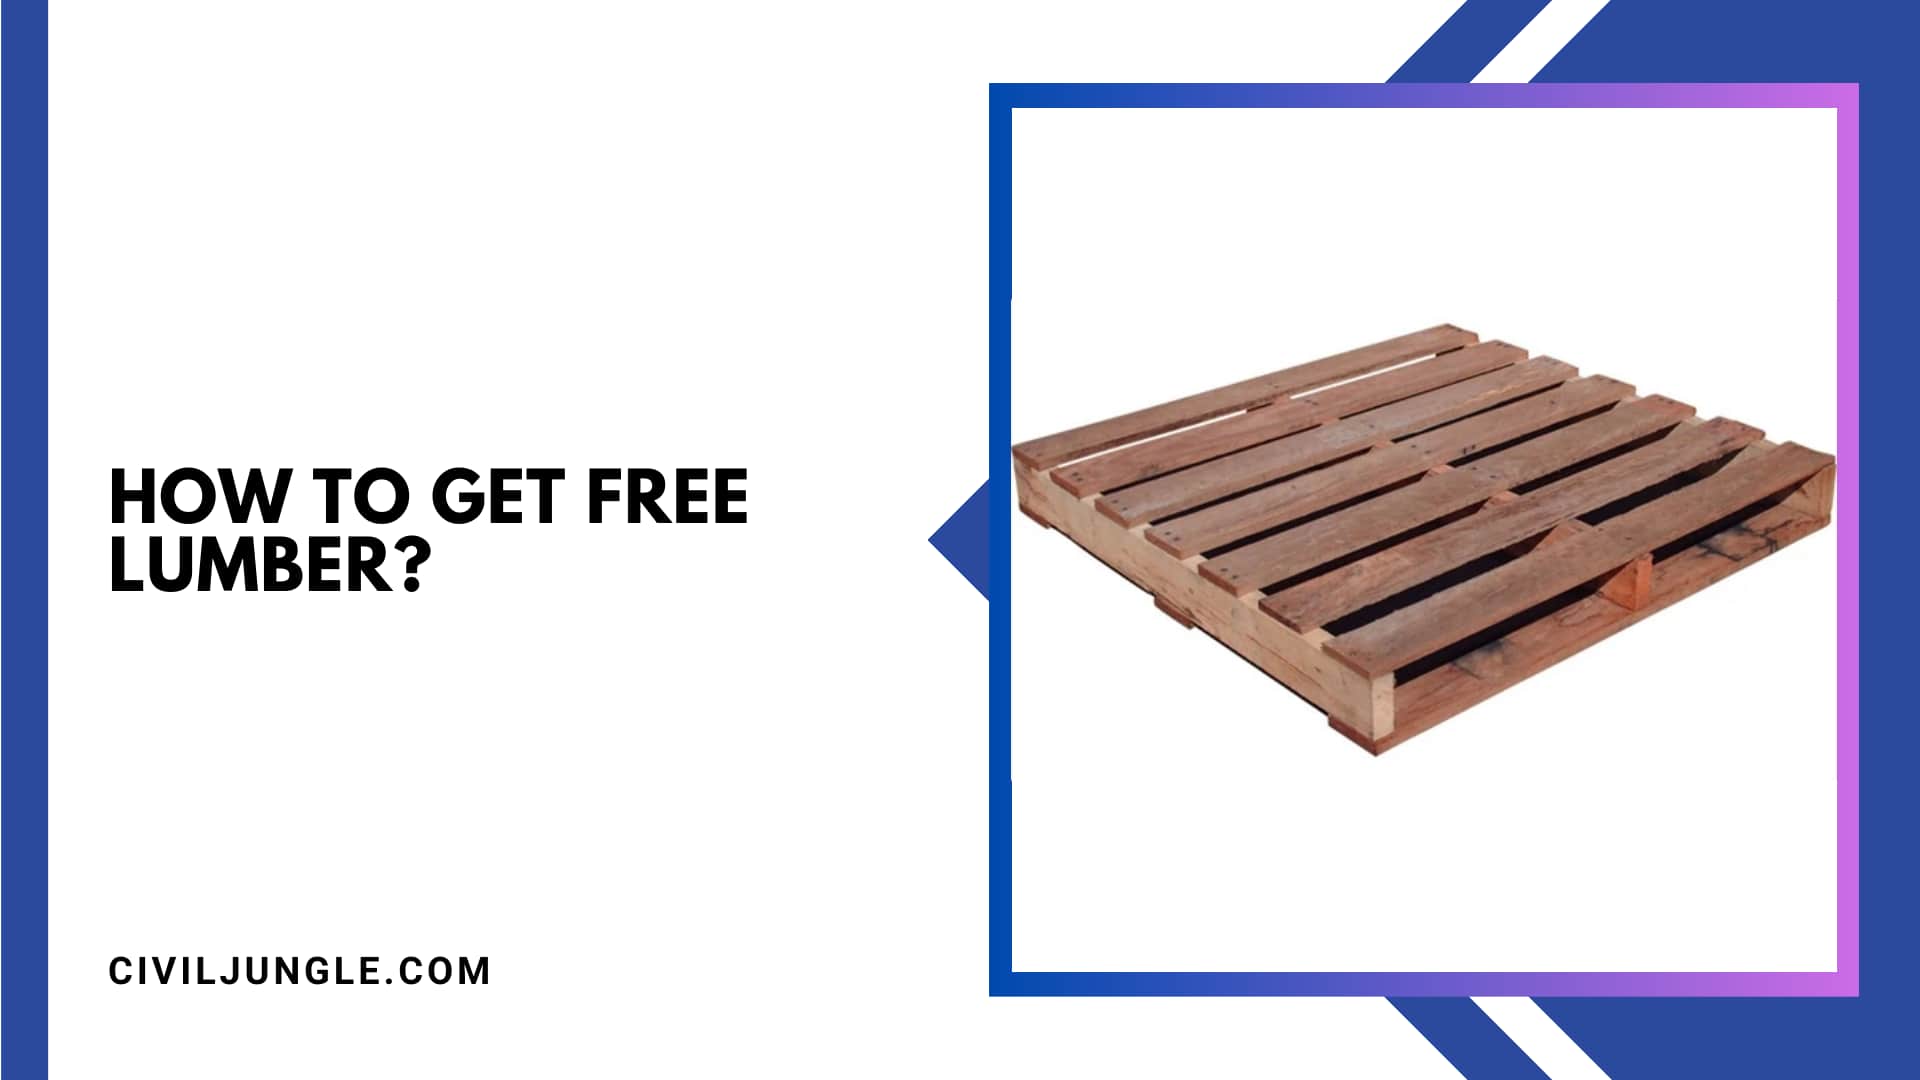 How to Get Free Lumber?